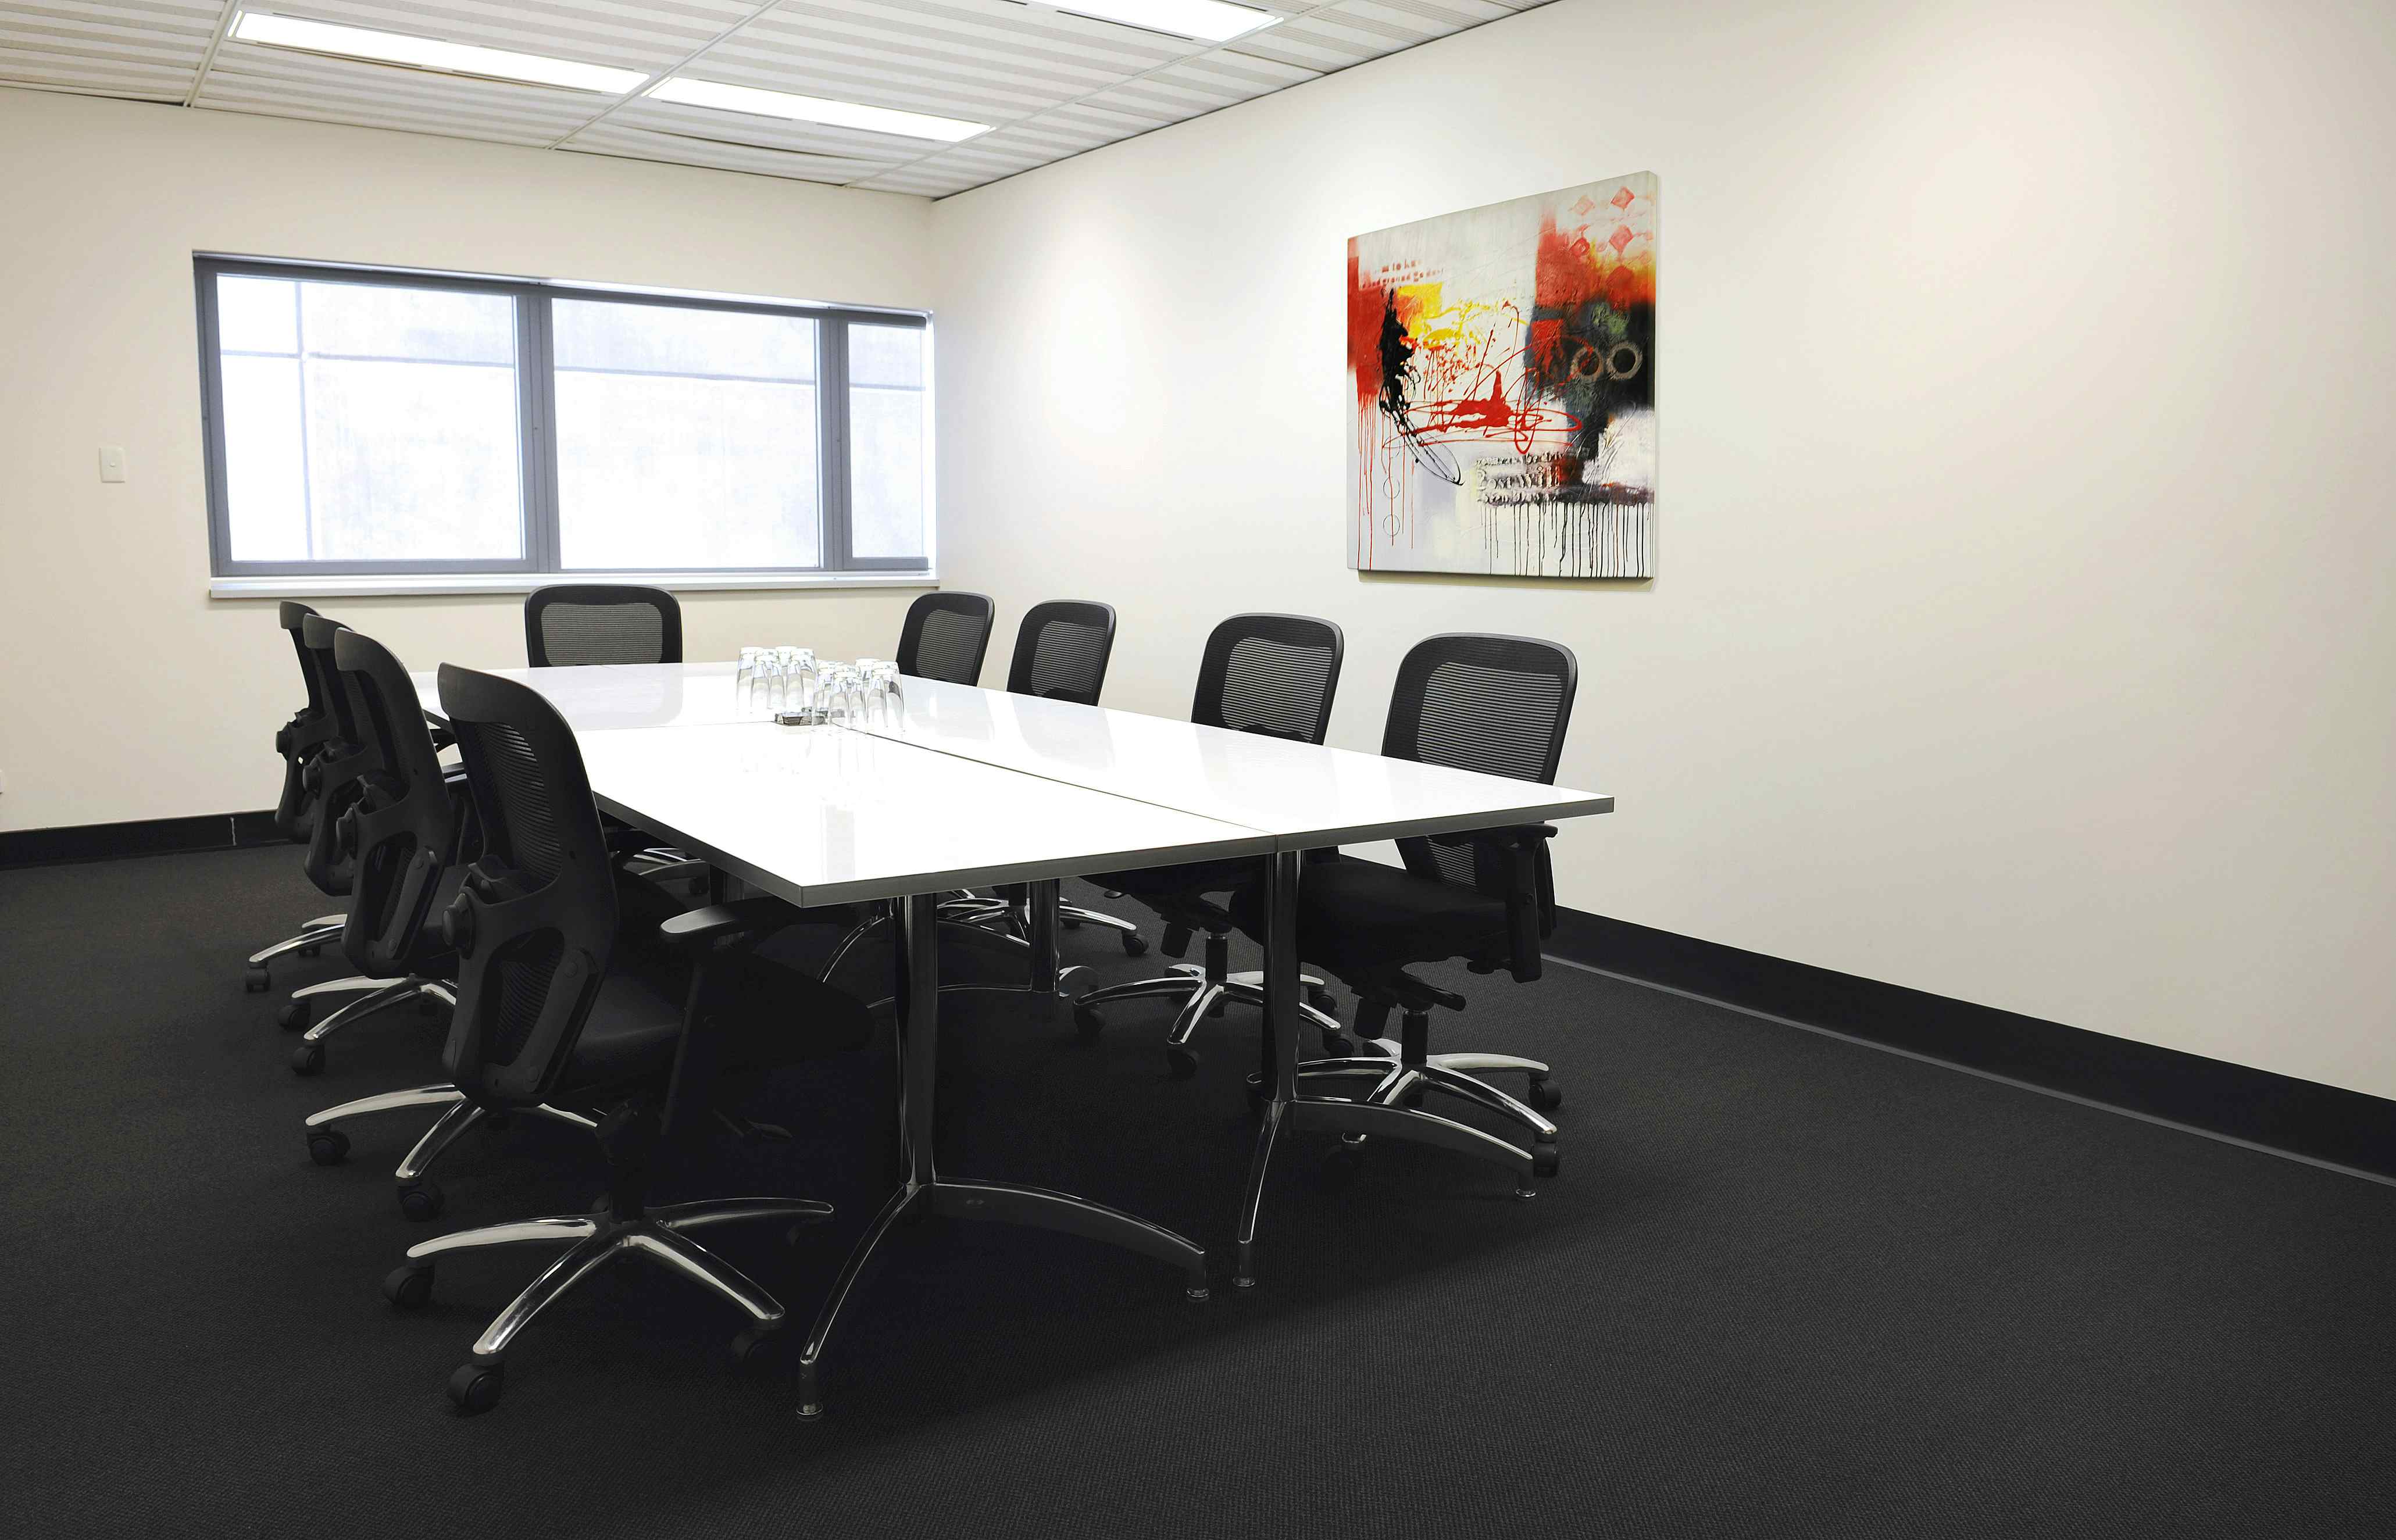 Endeavour Room, Adelaide Meeting Room Hire